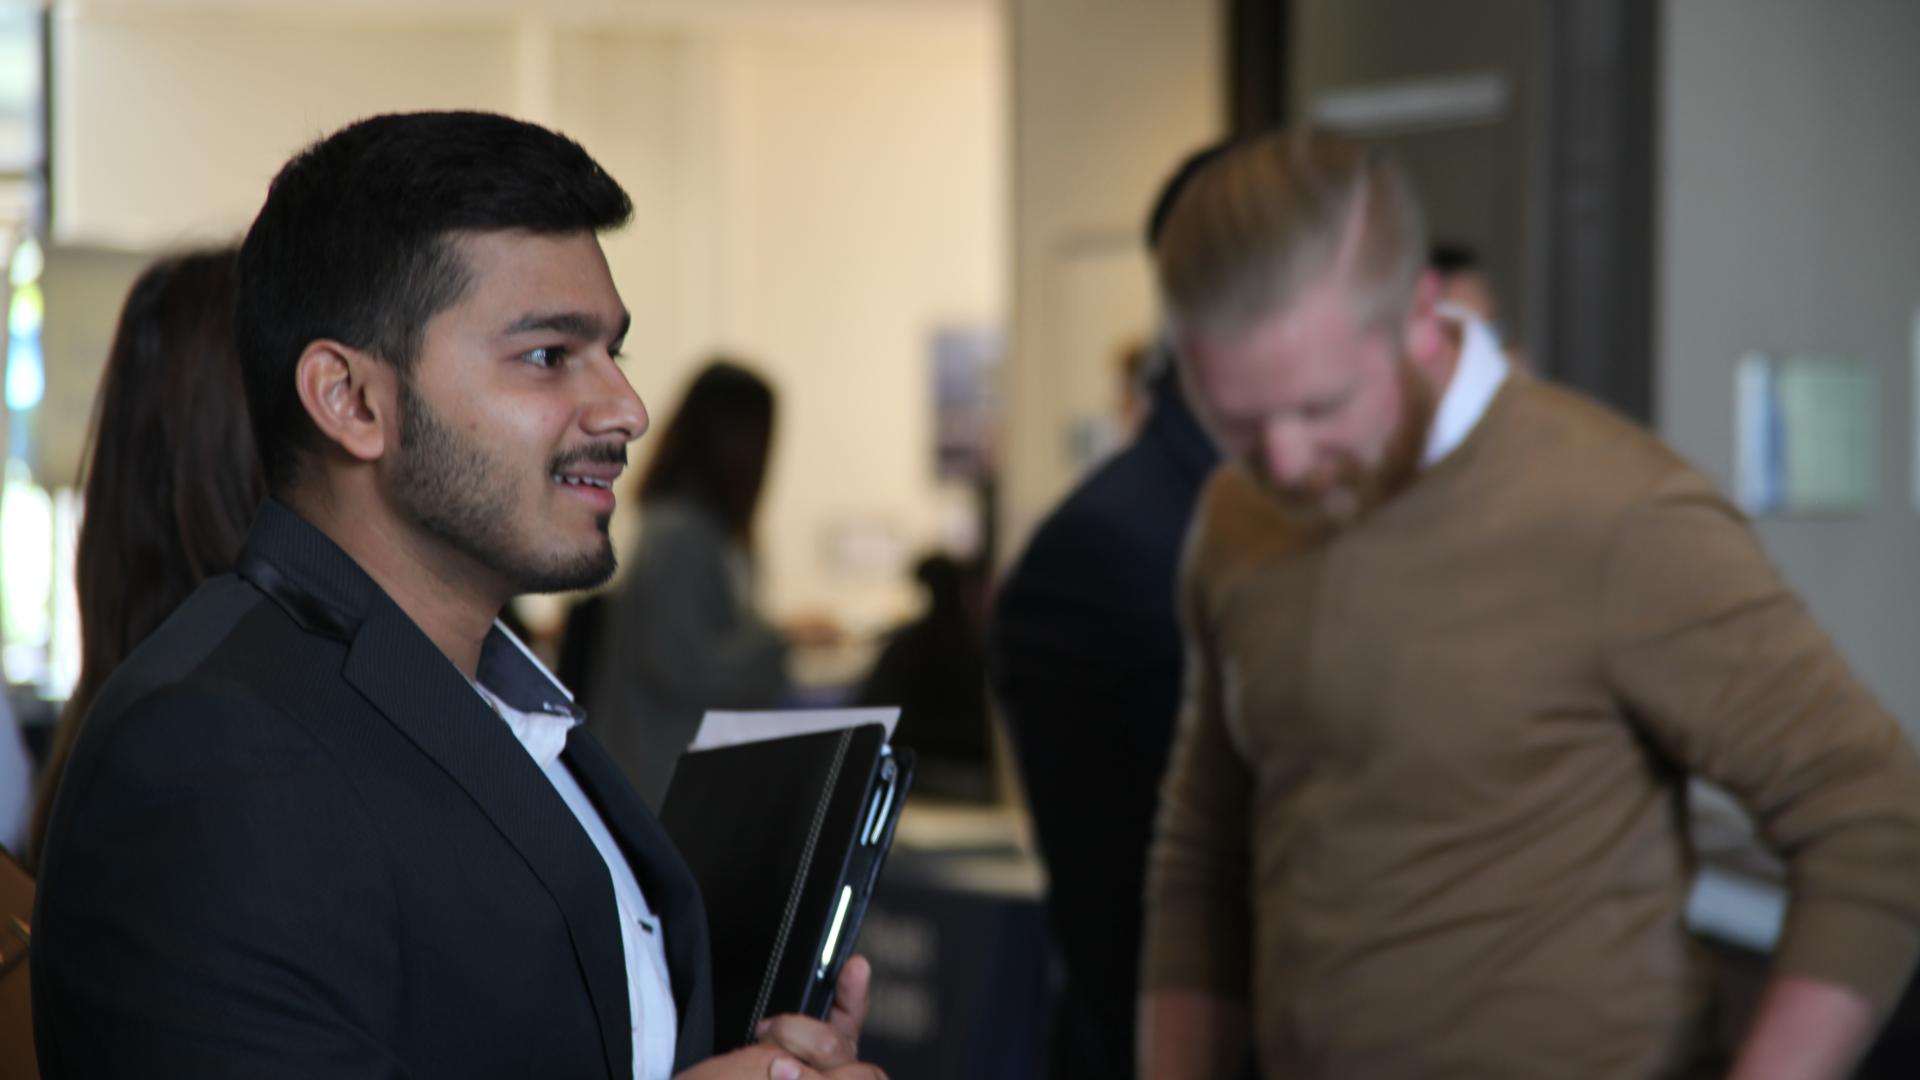 Students and employees at the Business and Healthcare Spring 2018 Job and Internship Fair